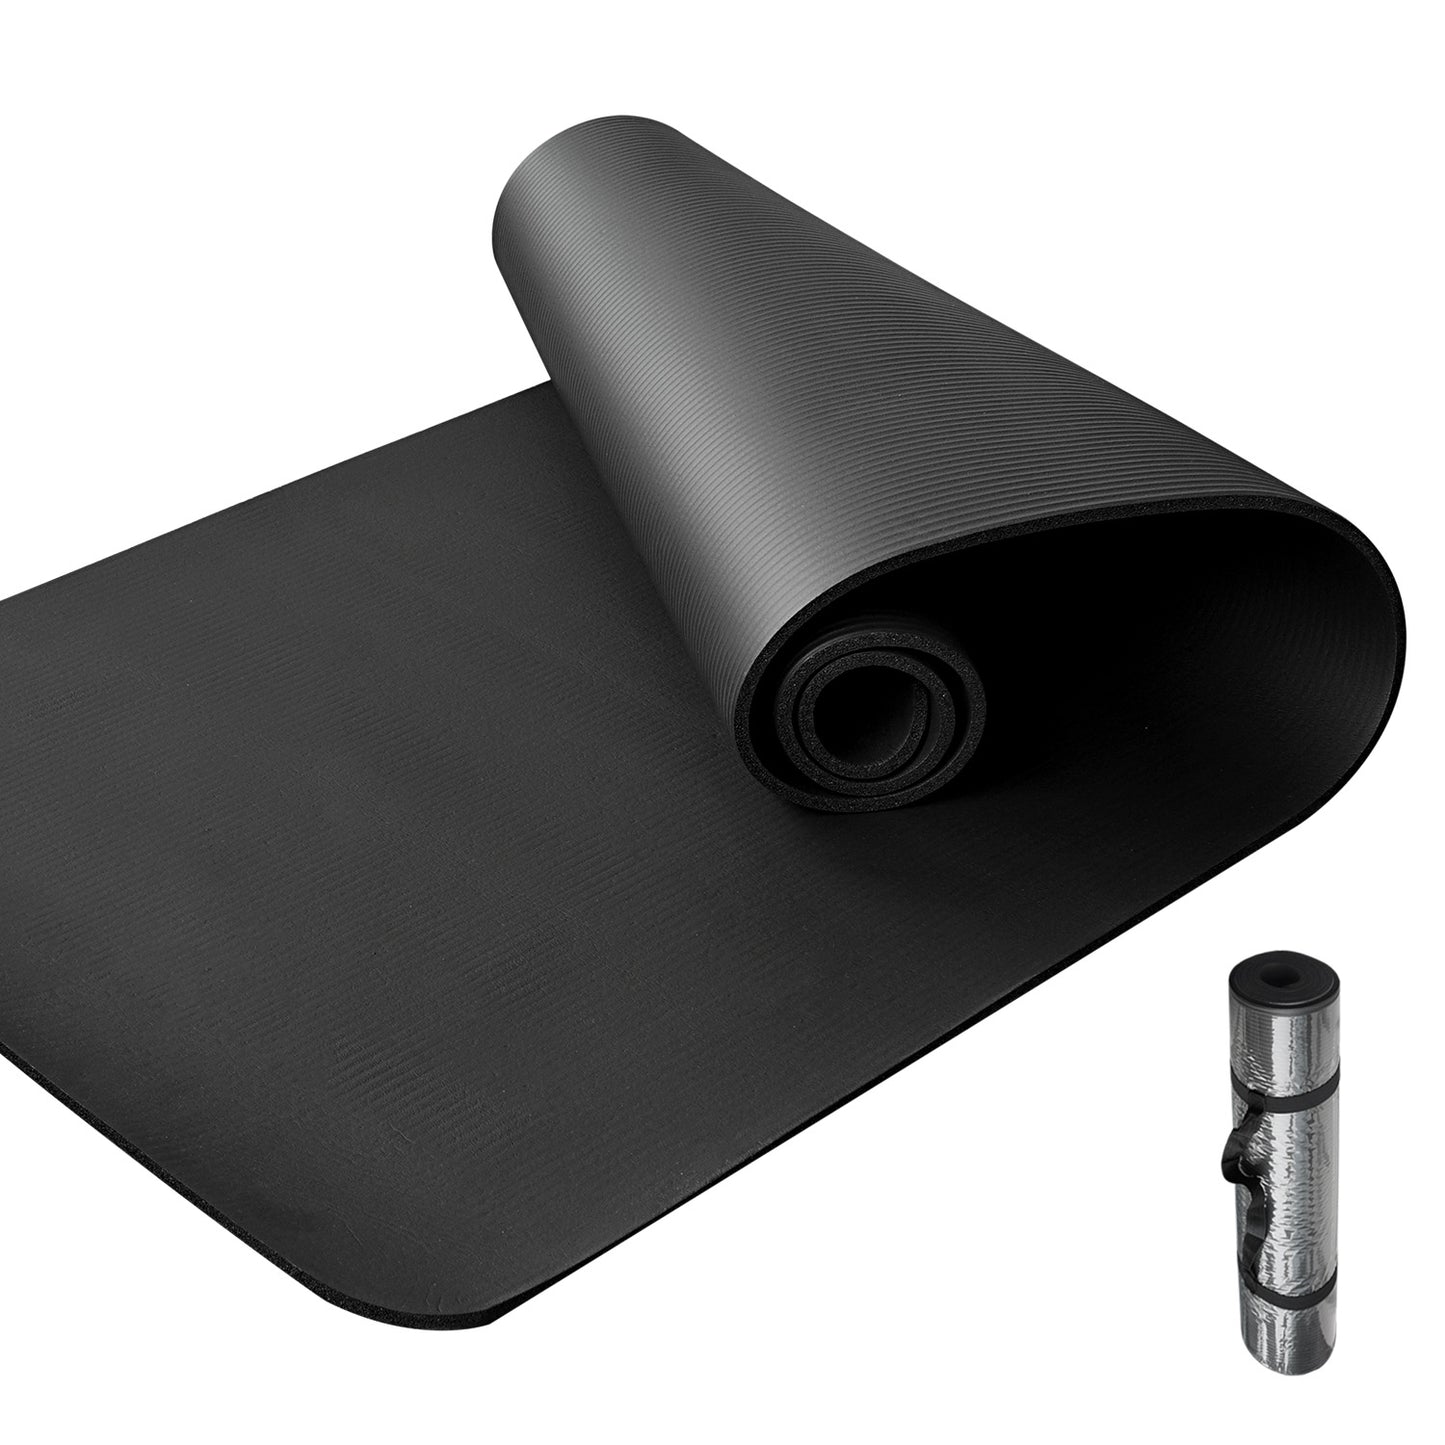 Yoga Mat with Carrying Strap - Black